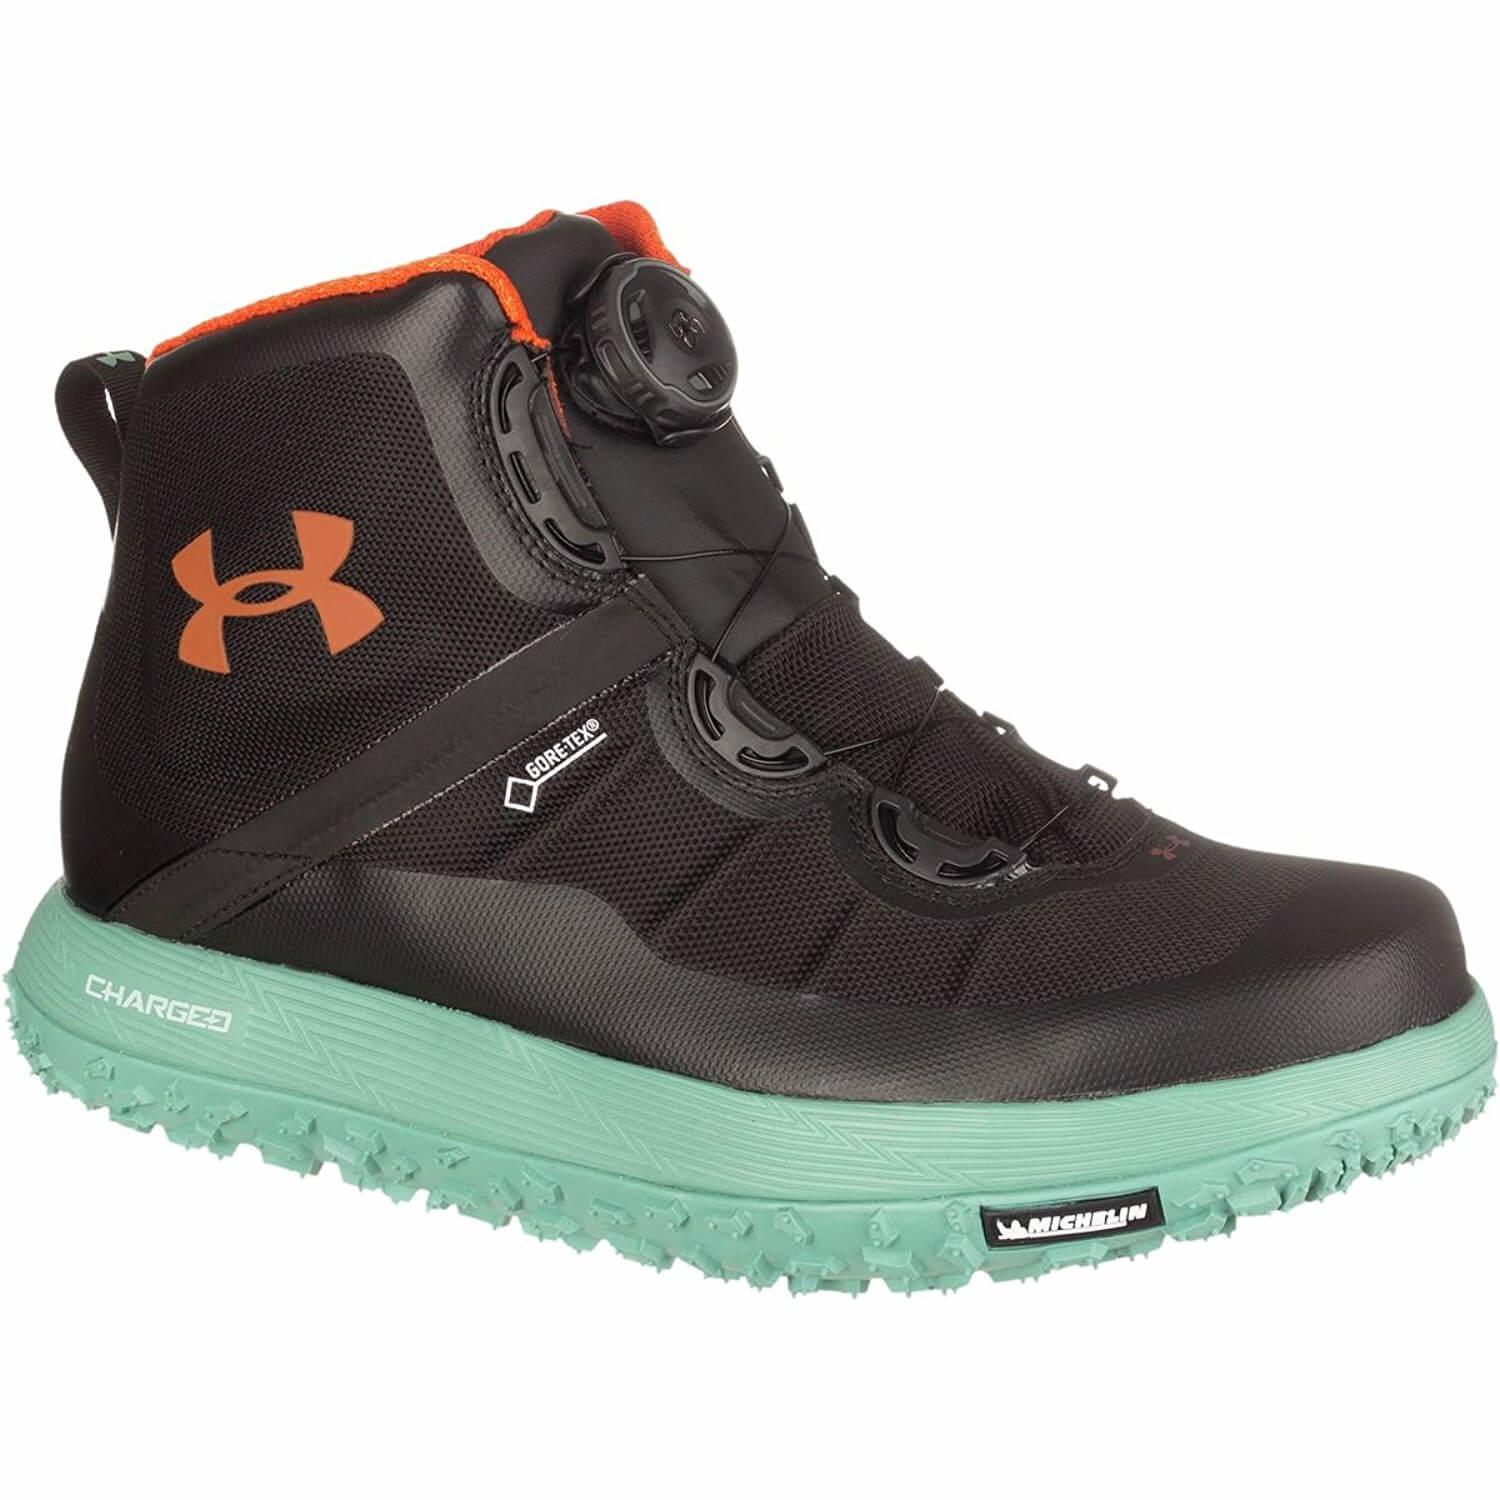 Under Armour Fat Tire GTX with teal outsole and midsole